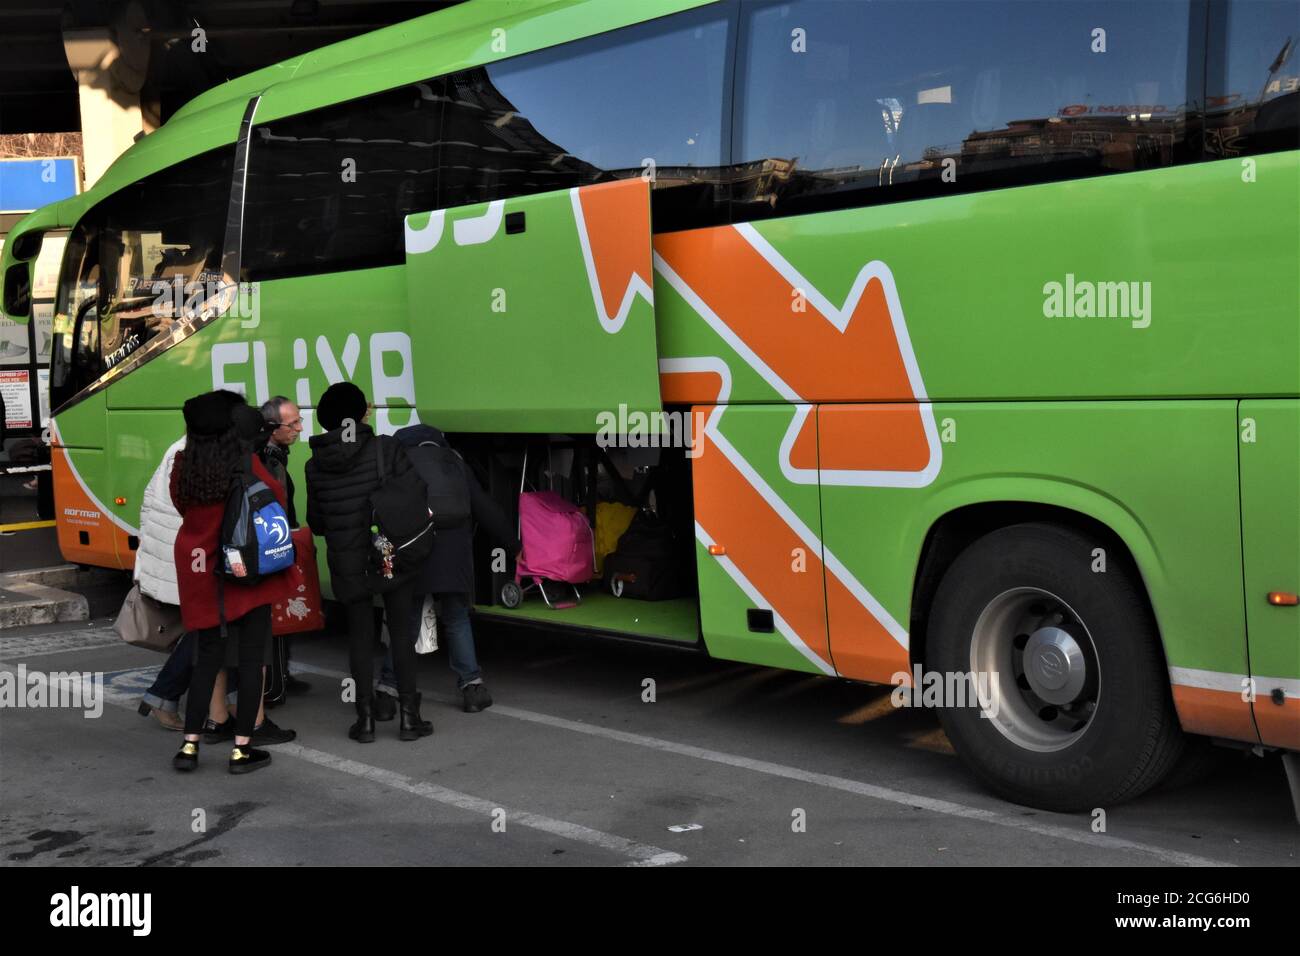 PEOPLE WITH LUGGAGE IN FRONT OF A FLIXBUS COMPANY Stock Photo - Alamy